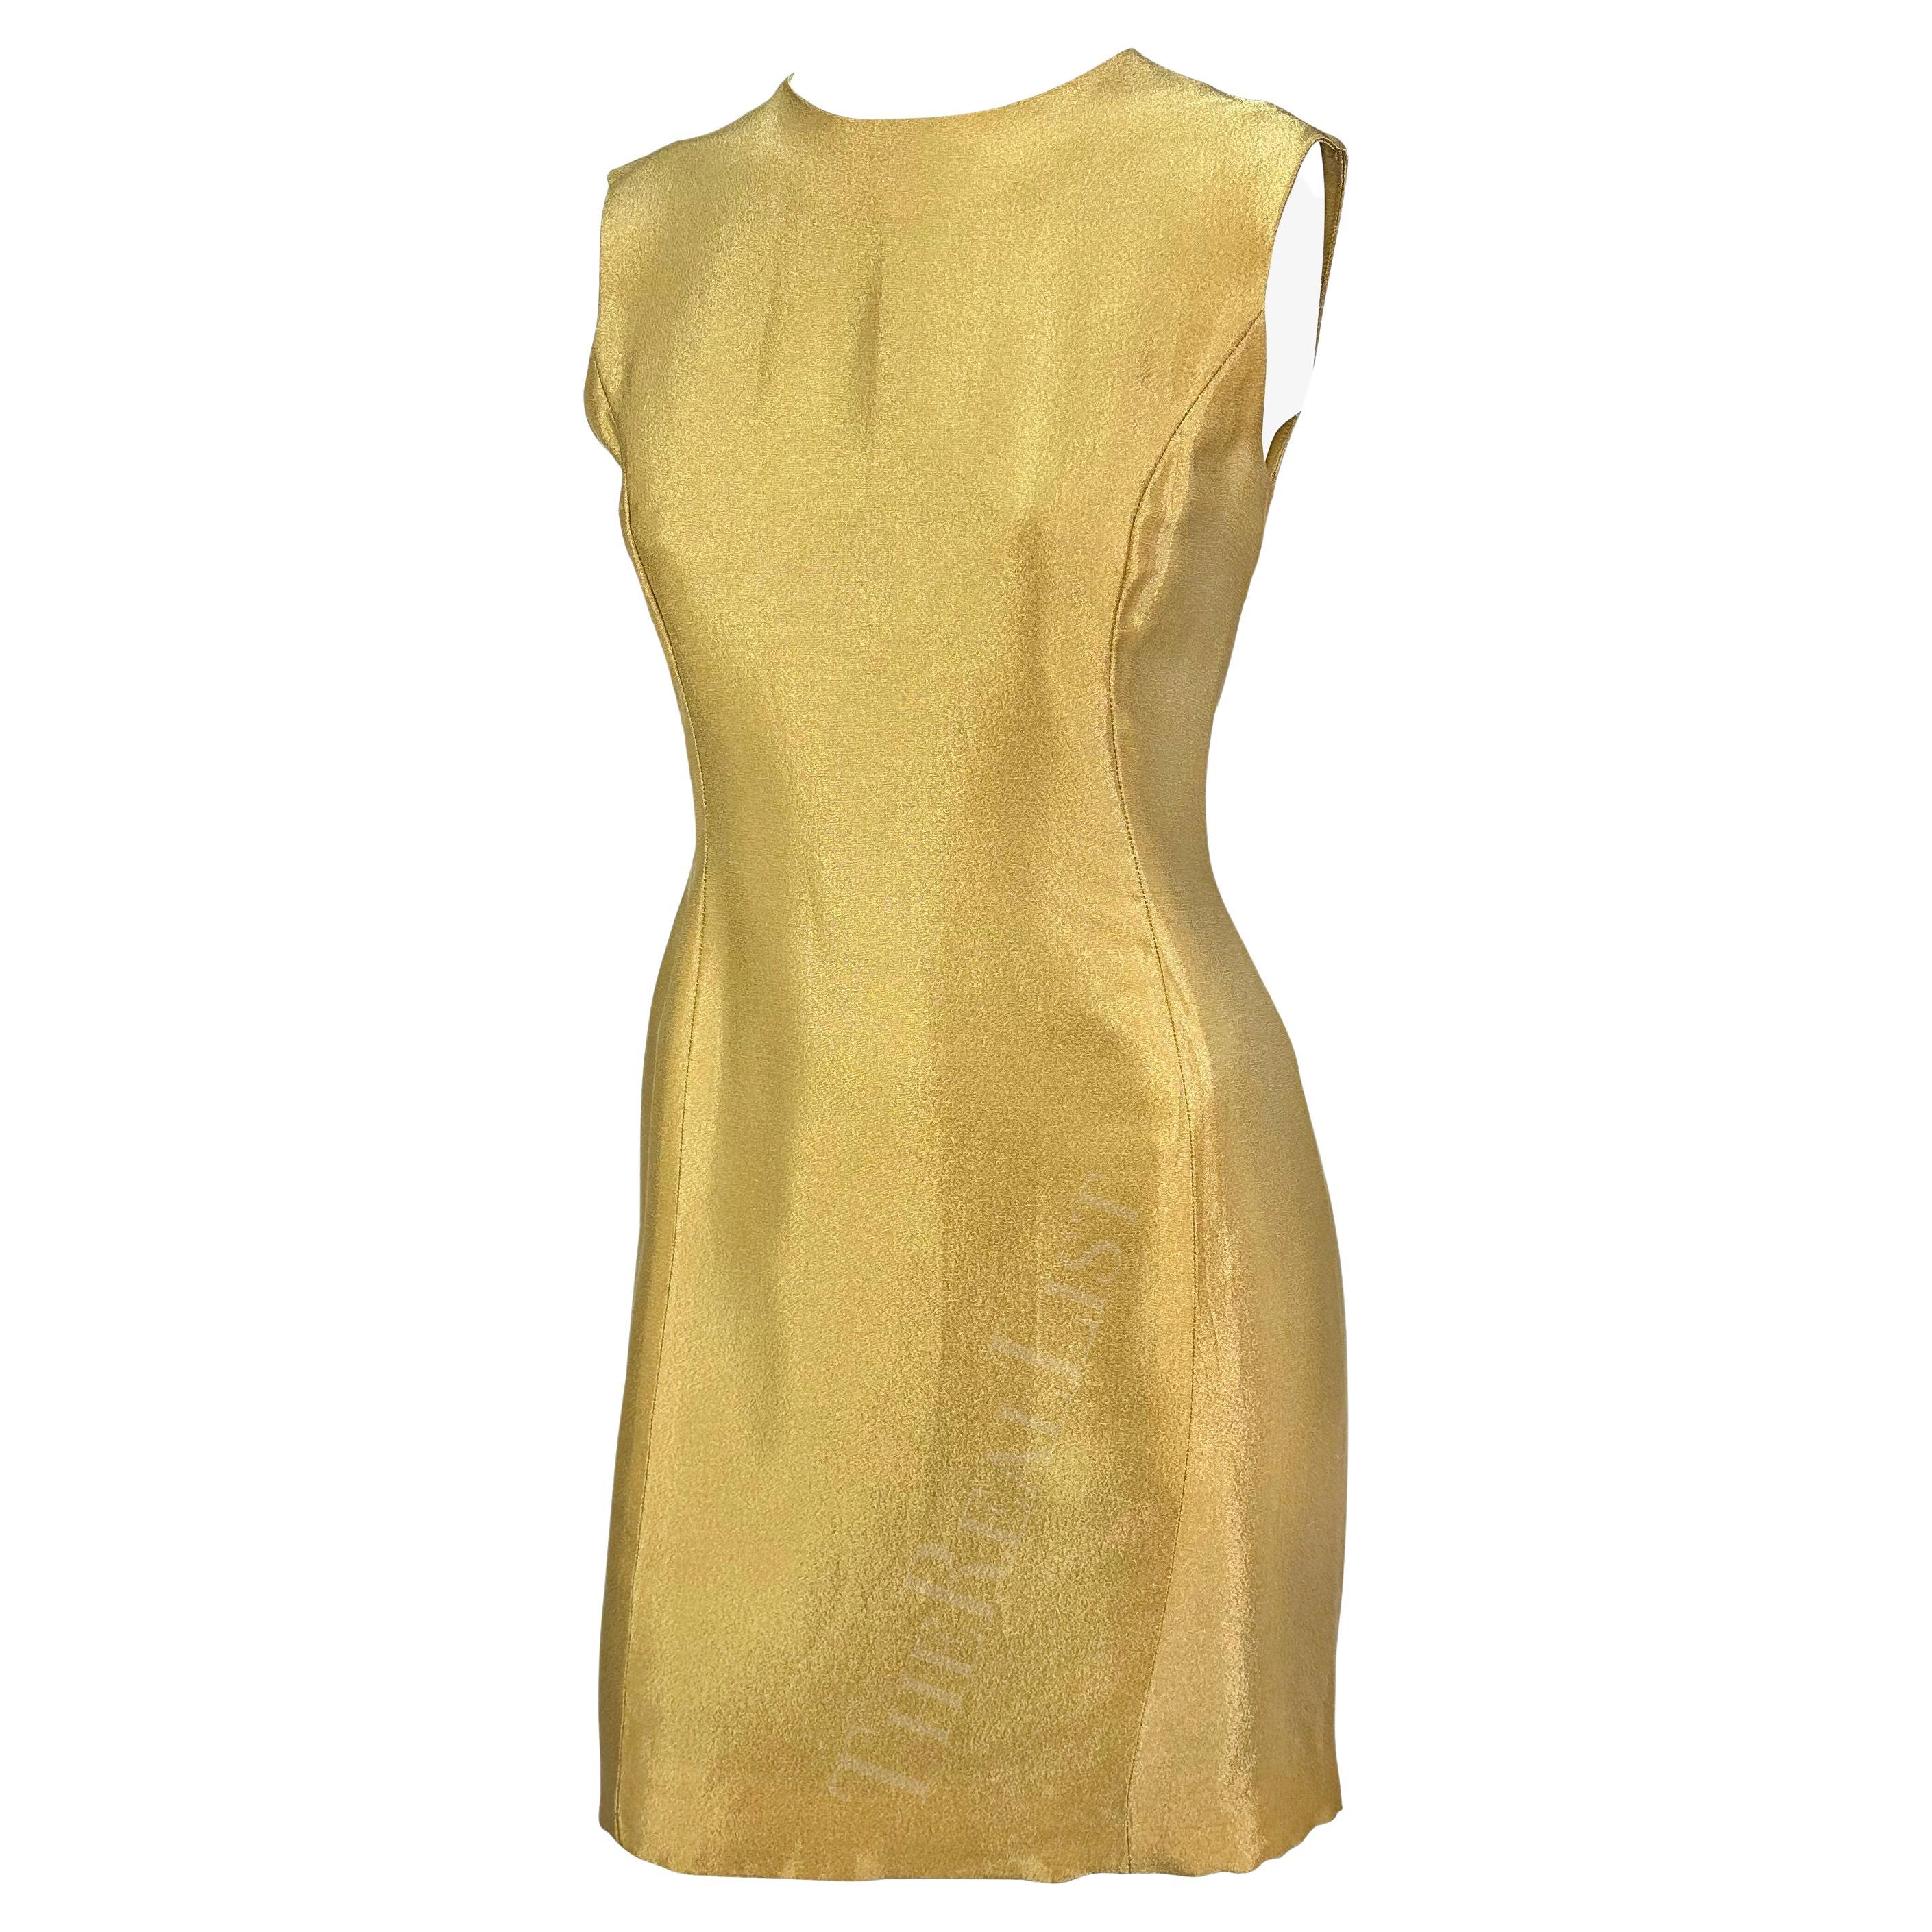 Presenting a fabulous metallic gold Gianni Versace dress, designed by Gianni Versace. From the Fall/Winter 1994 collection, this dress is constructed entirely of a shimmery metallic gold silk blend. This sleeveless dress features a crew neckline and